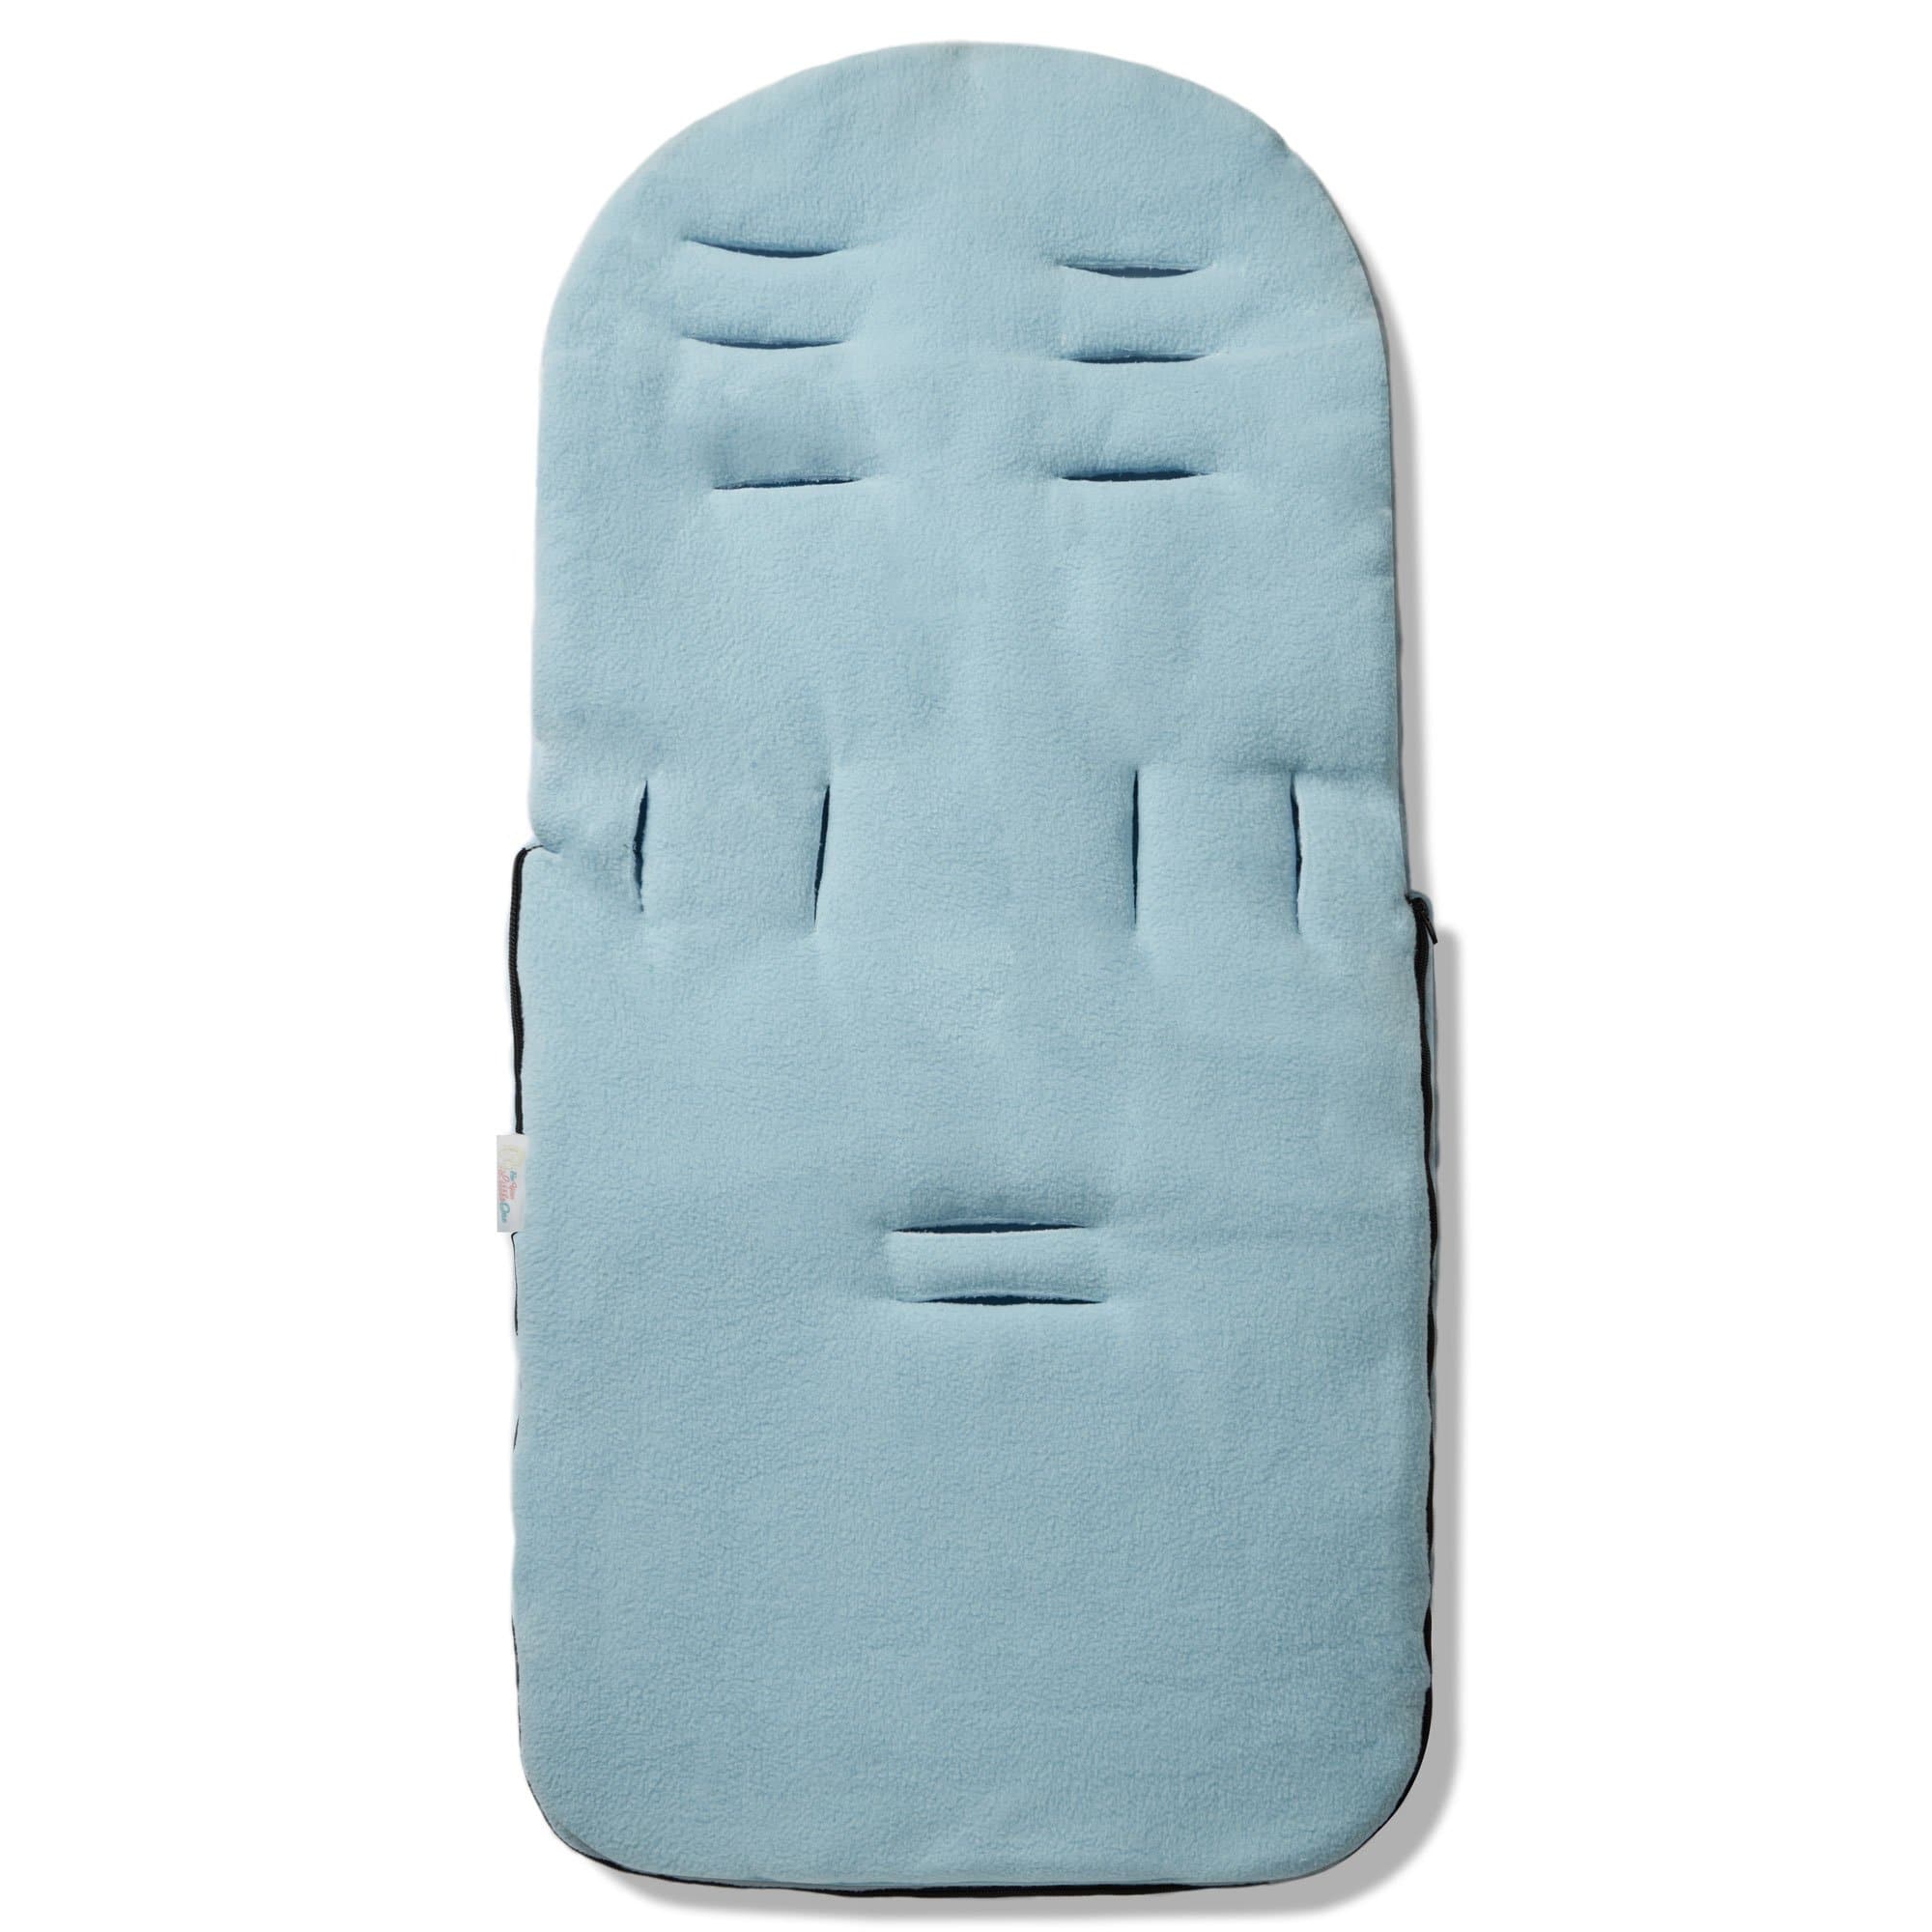 Dimple Footmuff / Cosy Toes Compatible with Bebe Confort - For Your Little One